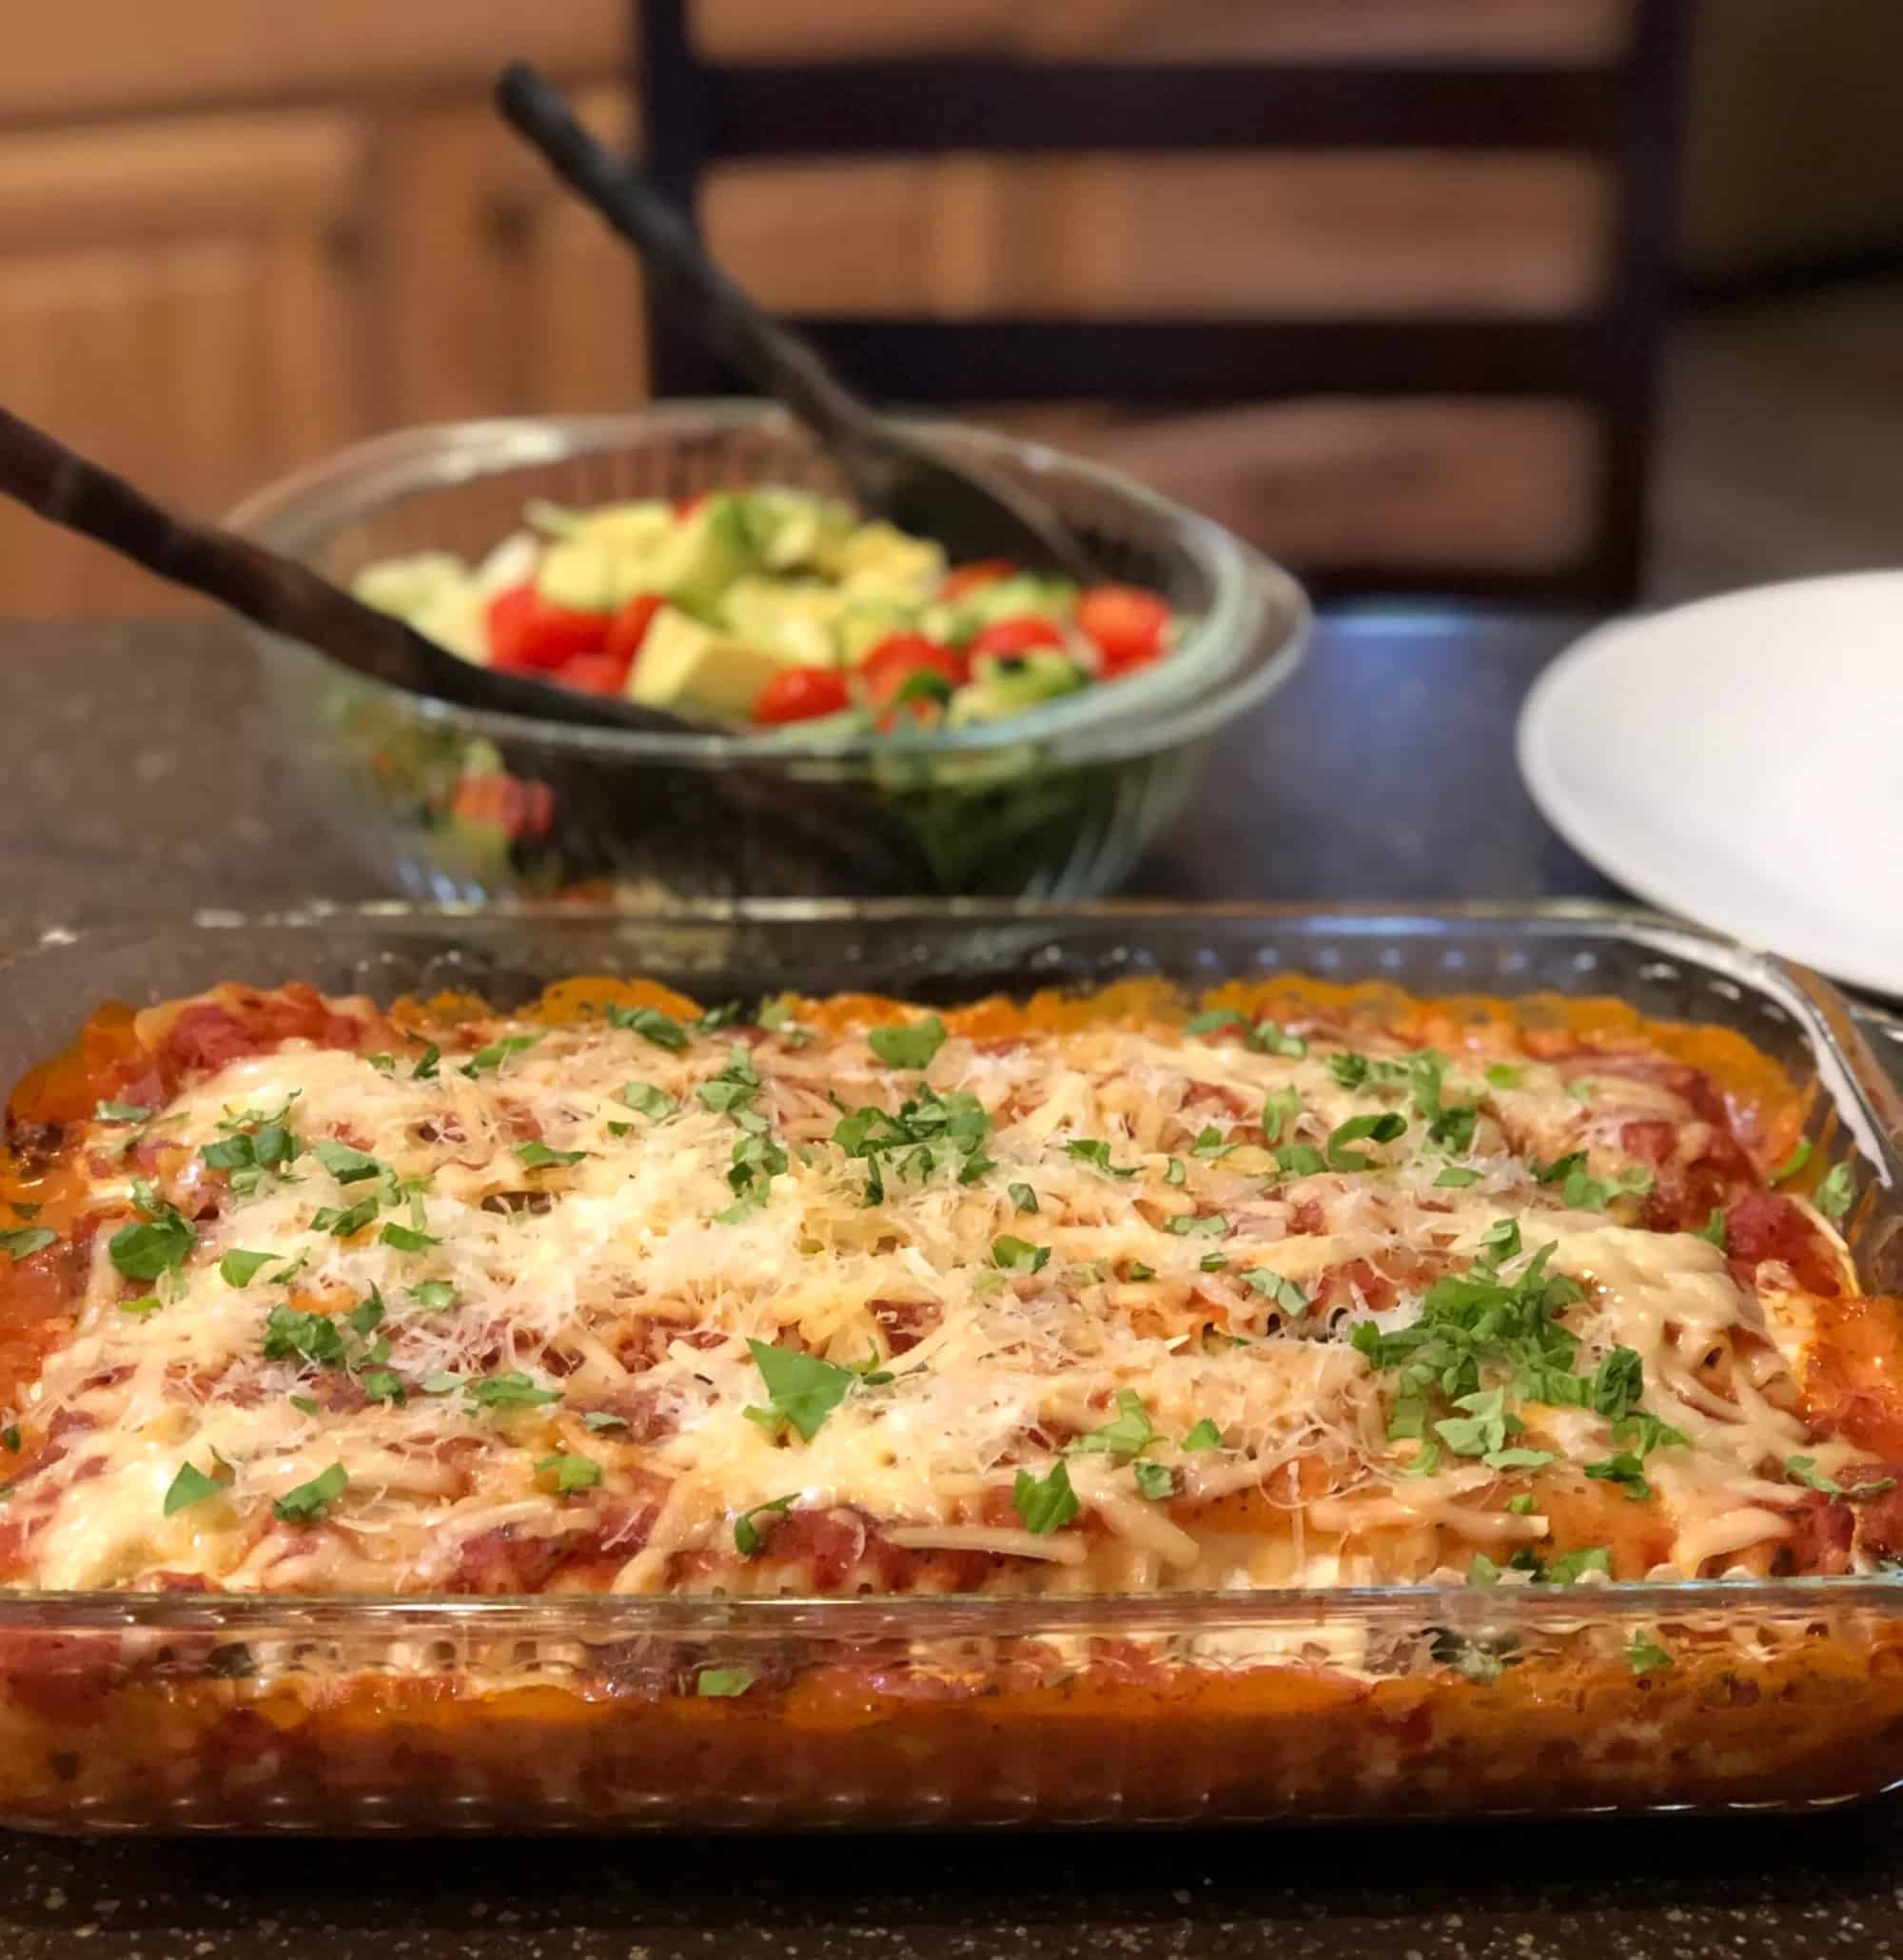 A mouthwatering dish of lasagna and a refreshing salad beautifully presented on a counter.